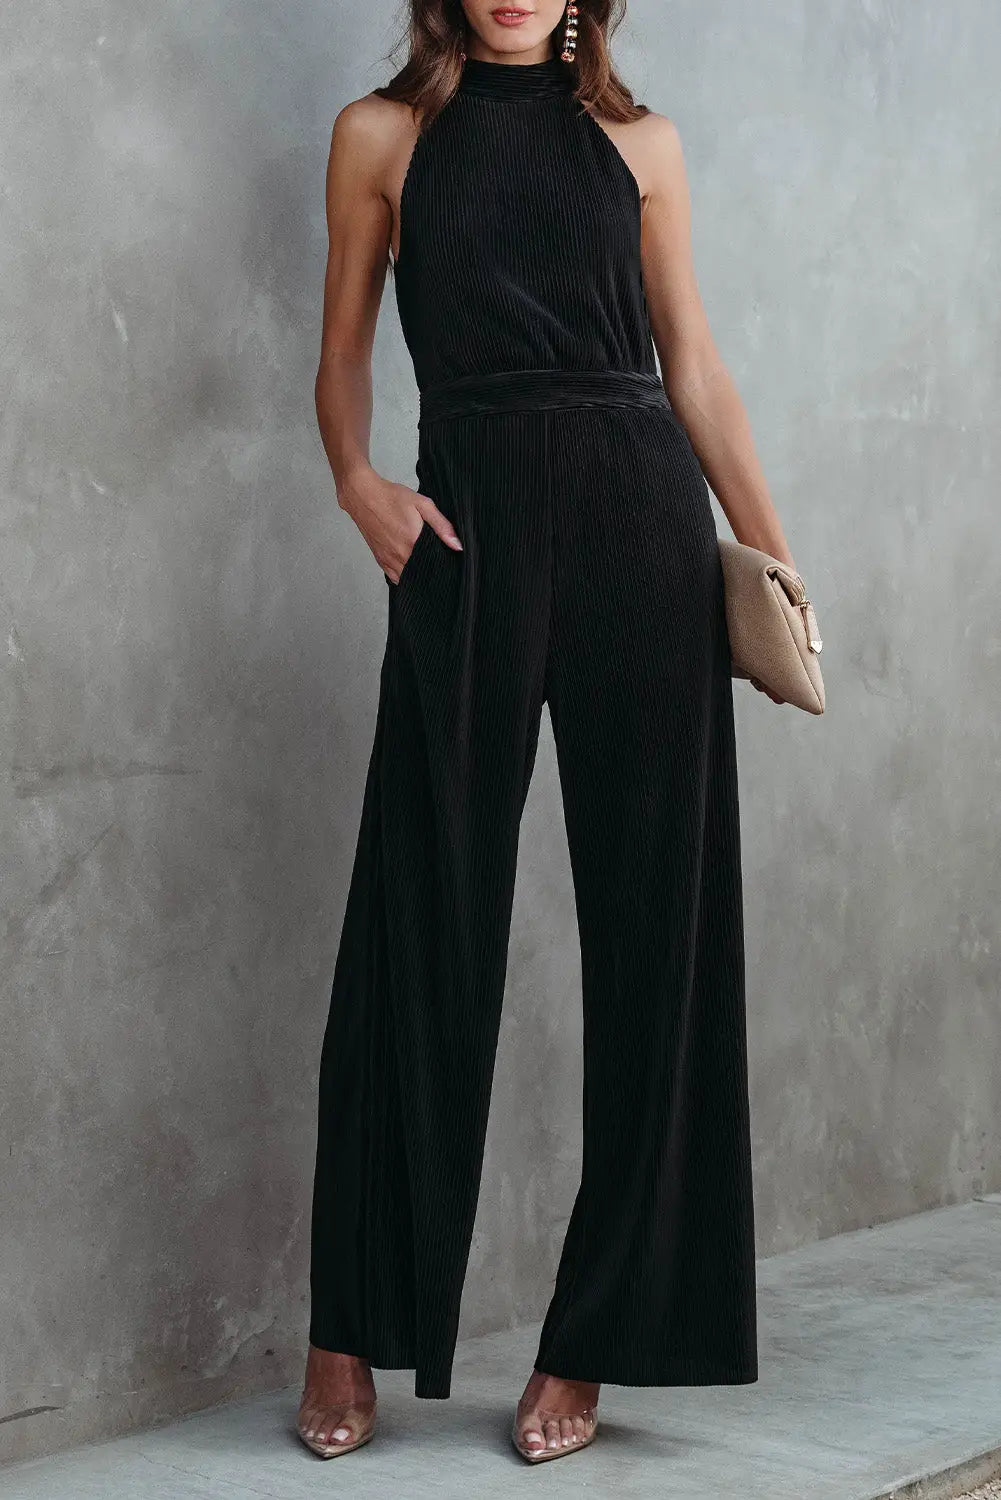 Top 10 velvet jumpsuits in the uk: find your perfect style